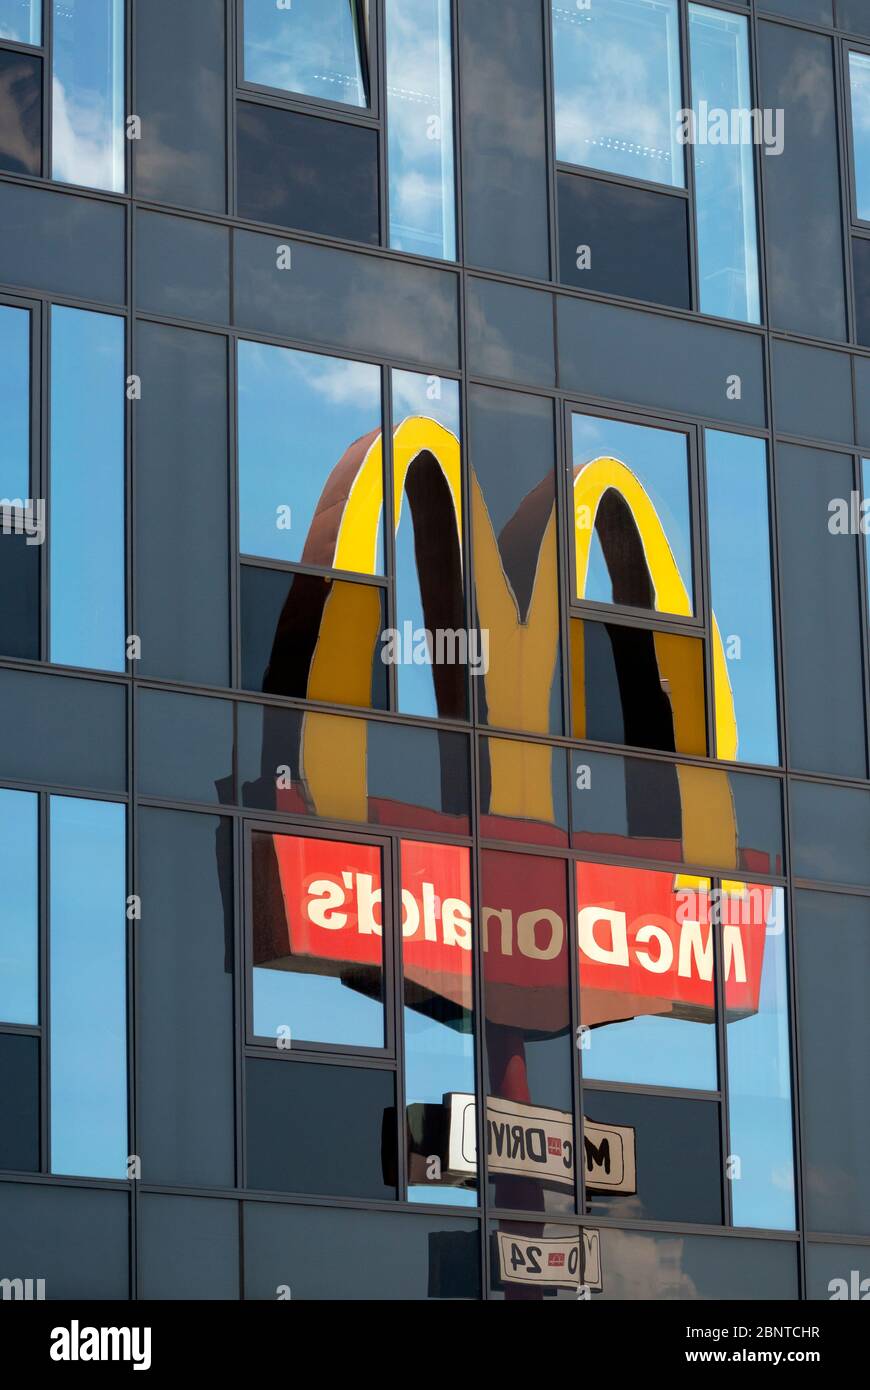 Mirrored McDonald's logo and sign reflects off glass building as unusual uncommon unique view composition Stock Photo